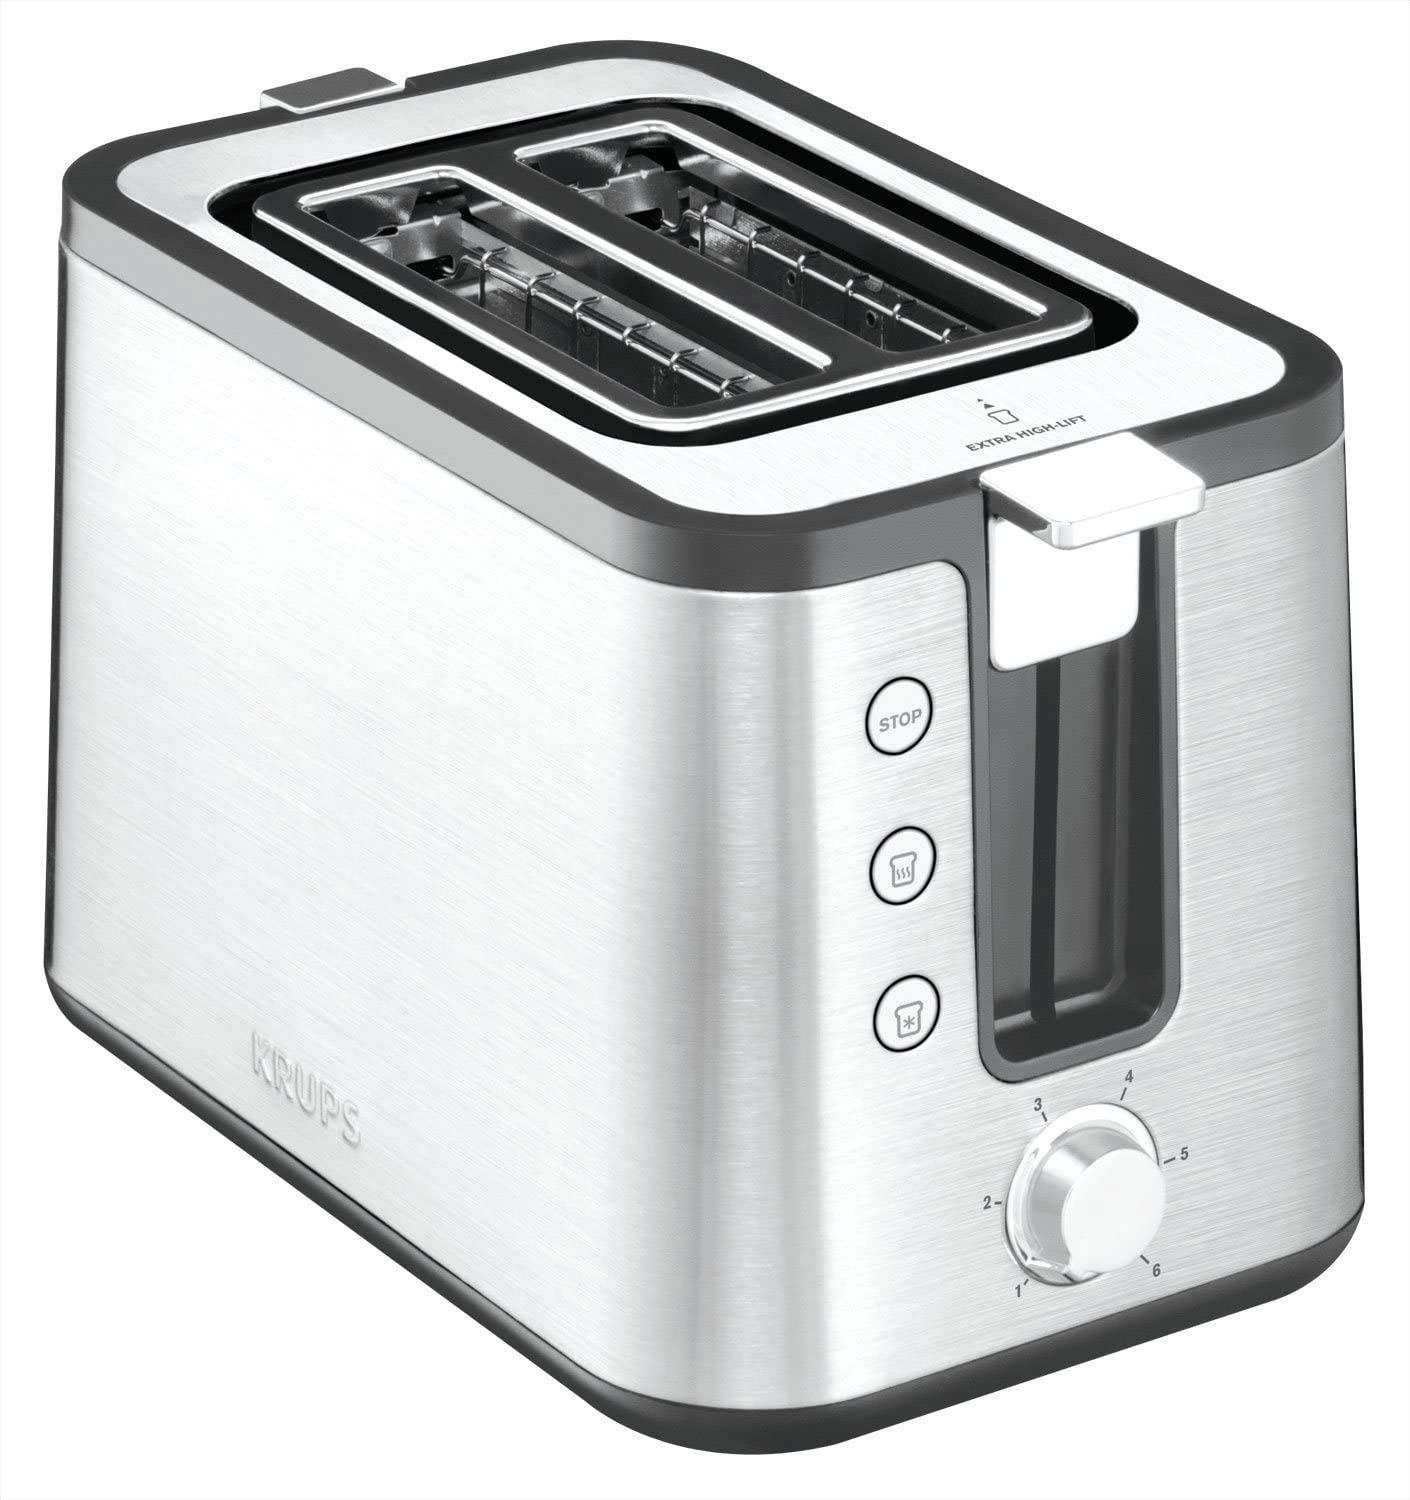 Krups Control Line KH442D Premium Toaster, Stainless Steel, 2-Slot Toaster, Roll Attachment, Silver/Black